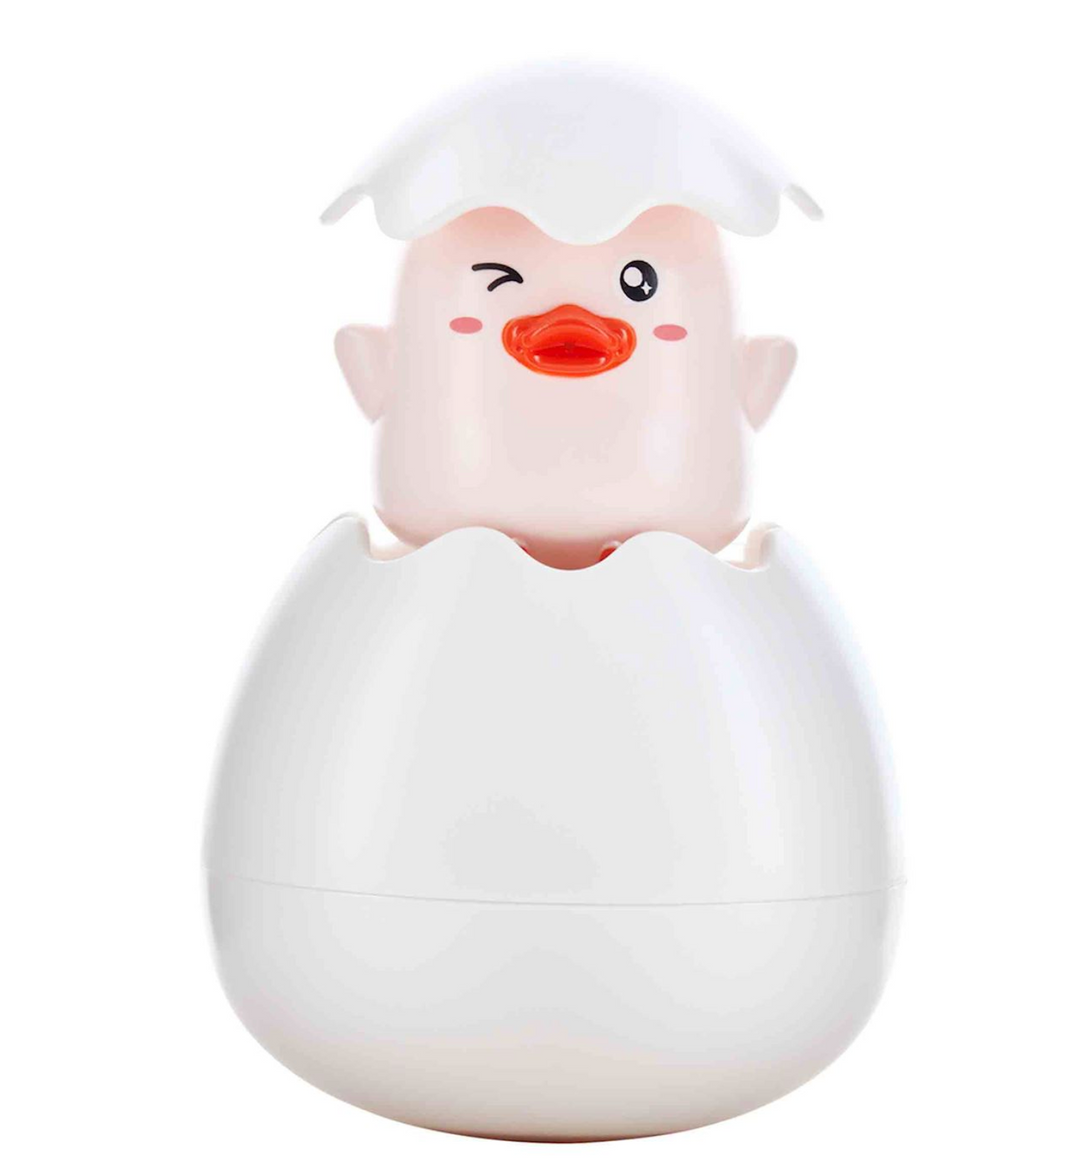 Pop-up Chick Water Bath Toy- Pink